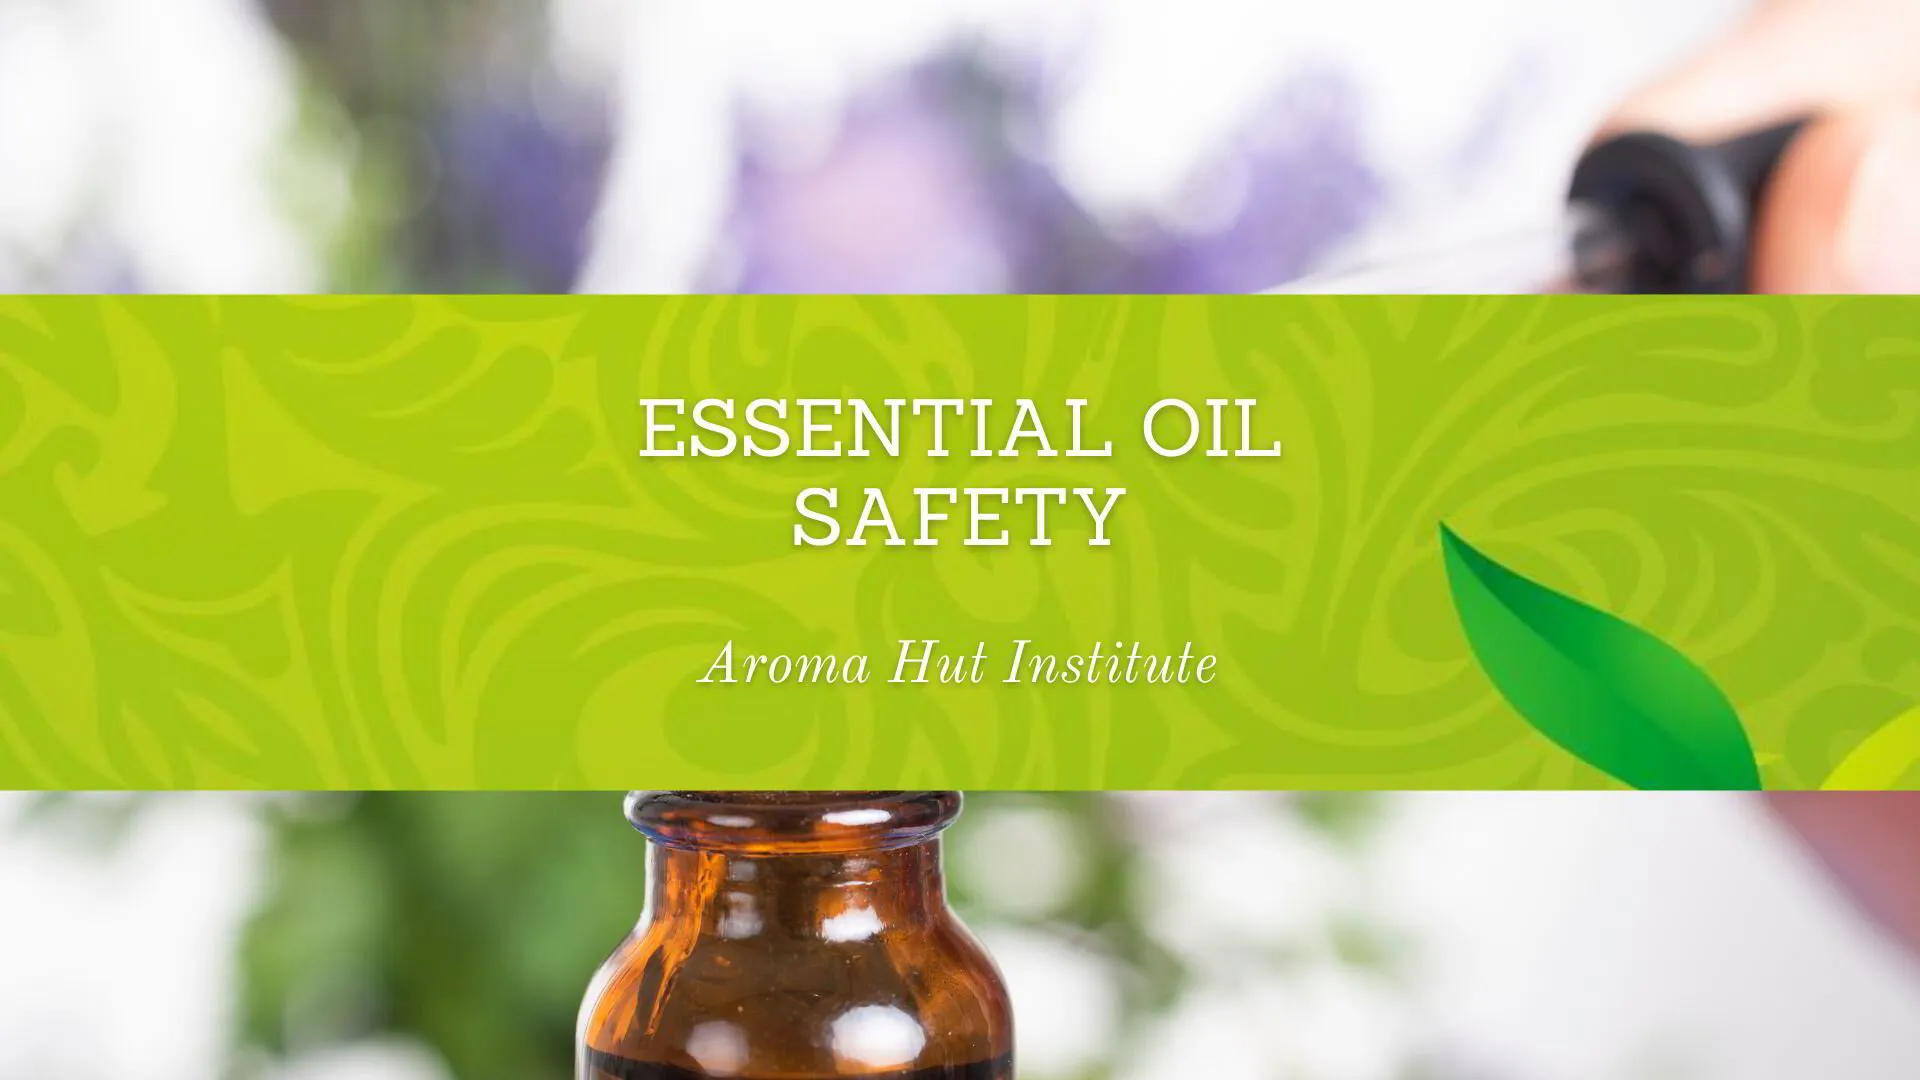 Essential Oil Safety: What can influence the safety of essential oils?